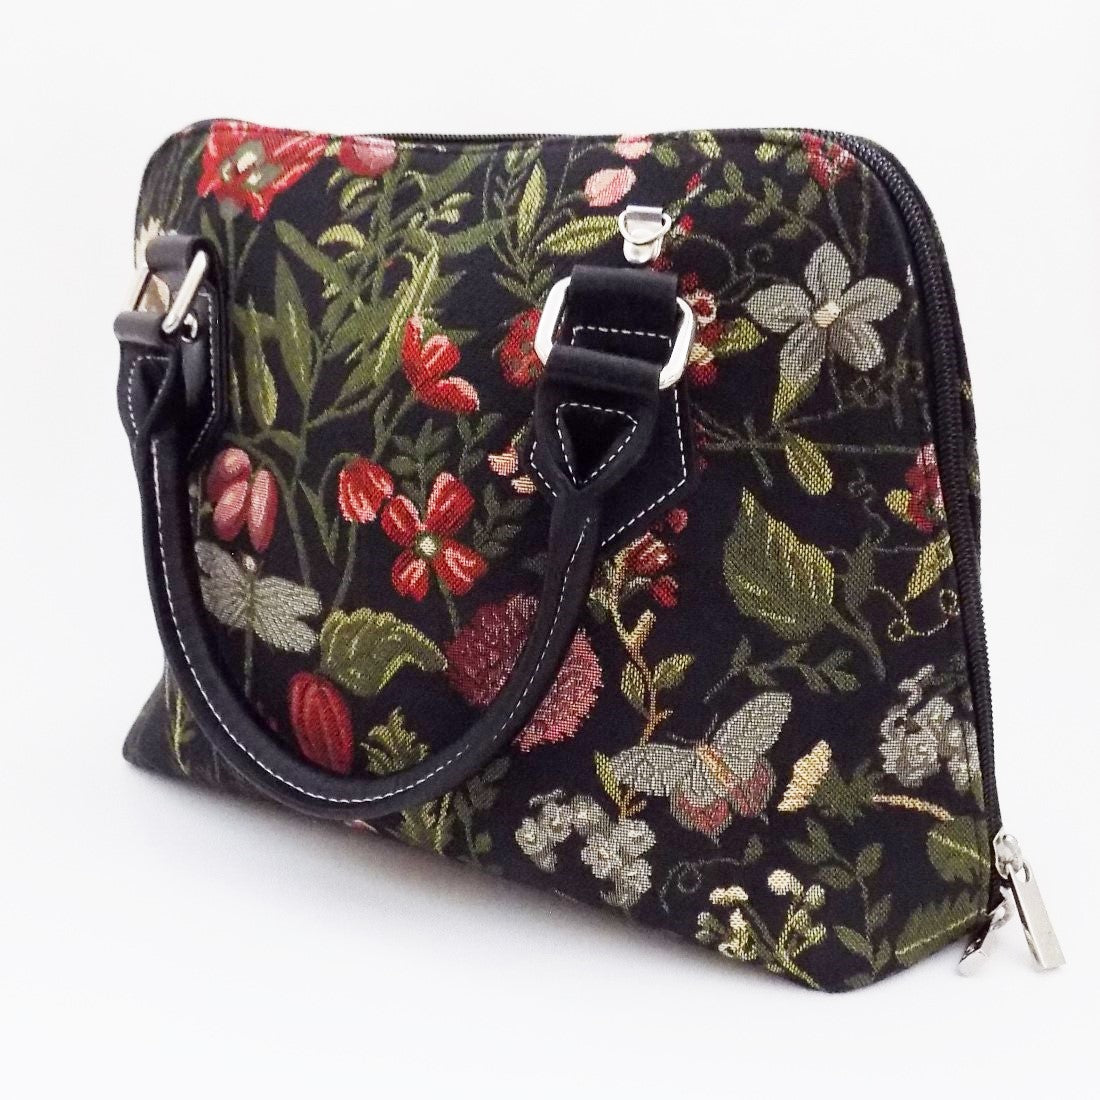 TAPESTRY BAGS - Wisteria Bloom